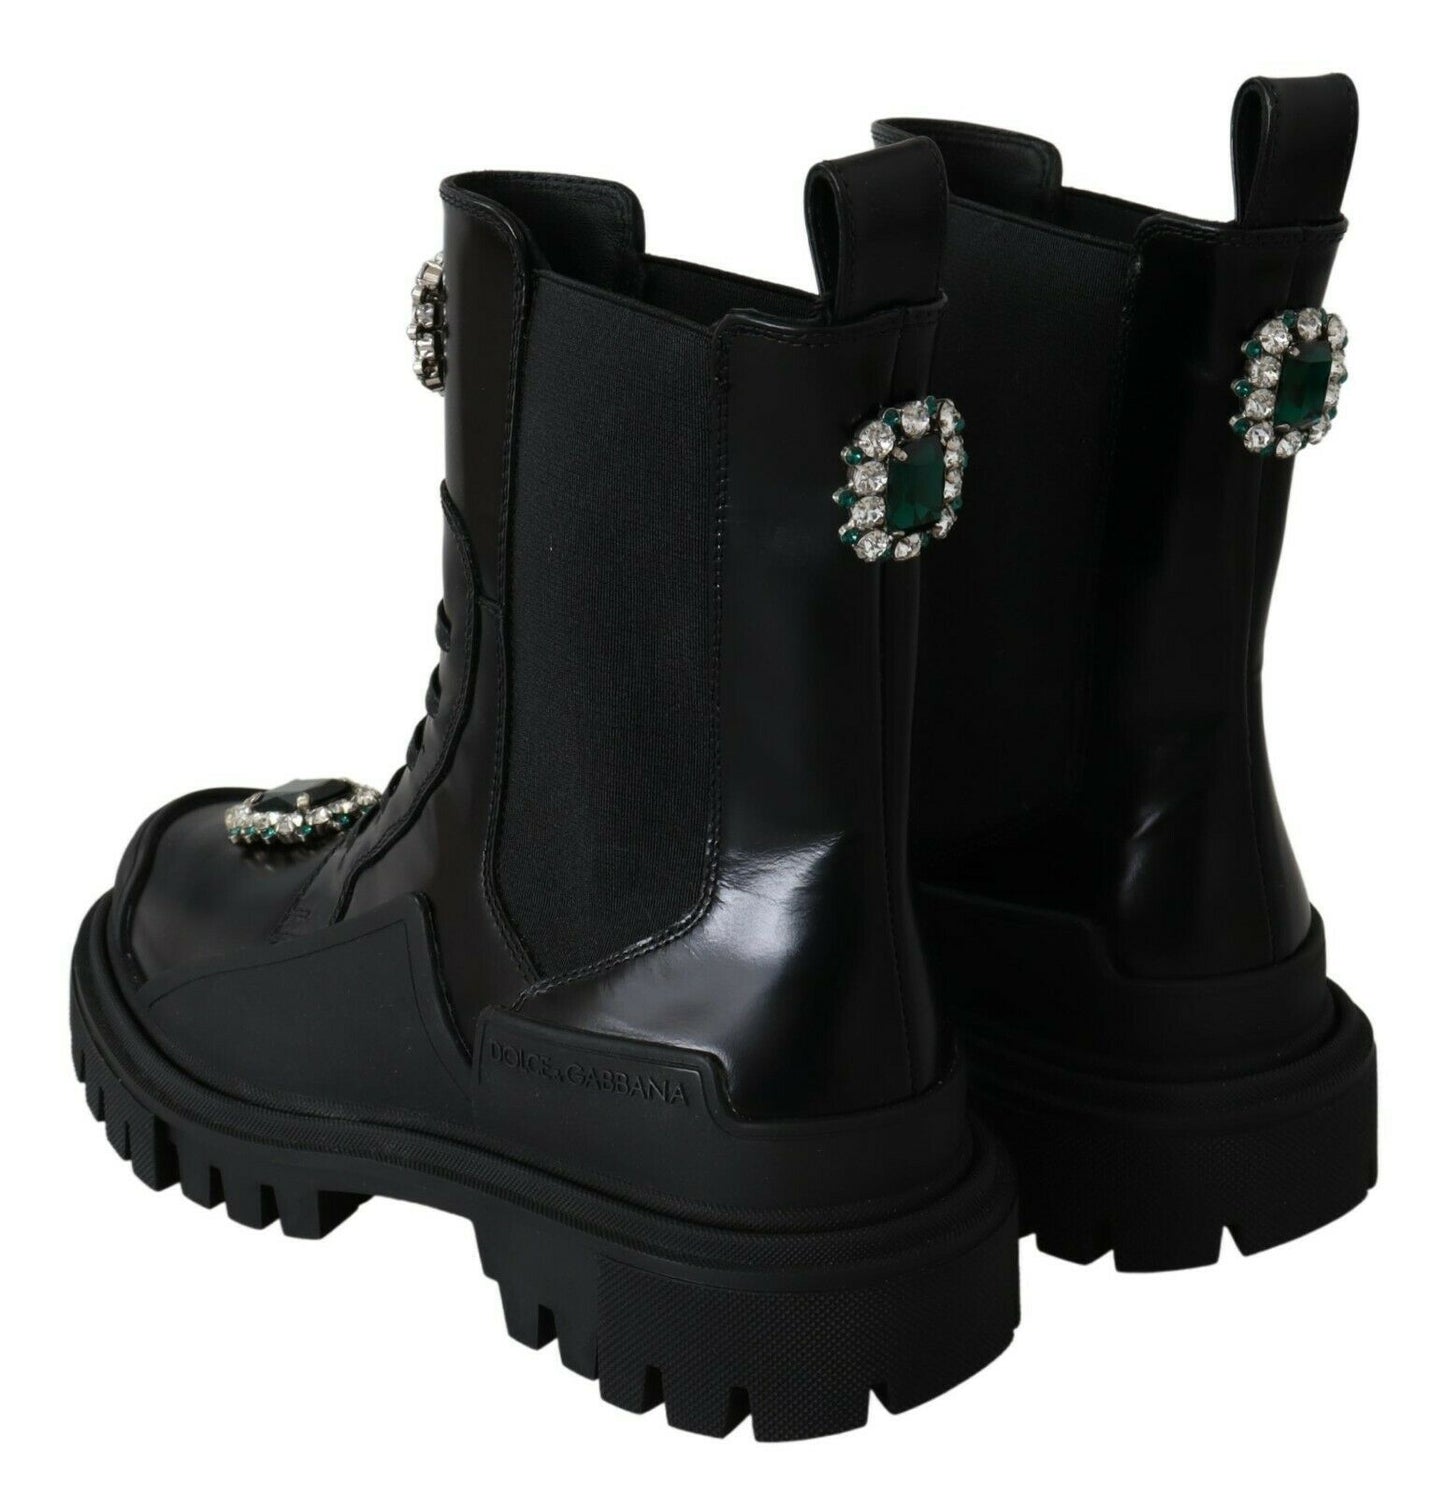 Elegant Black Leather Combat Boots with Crystal Detail